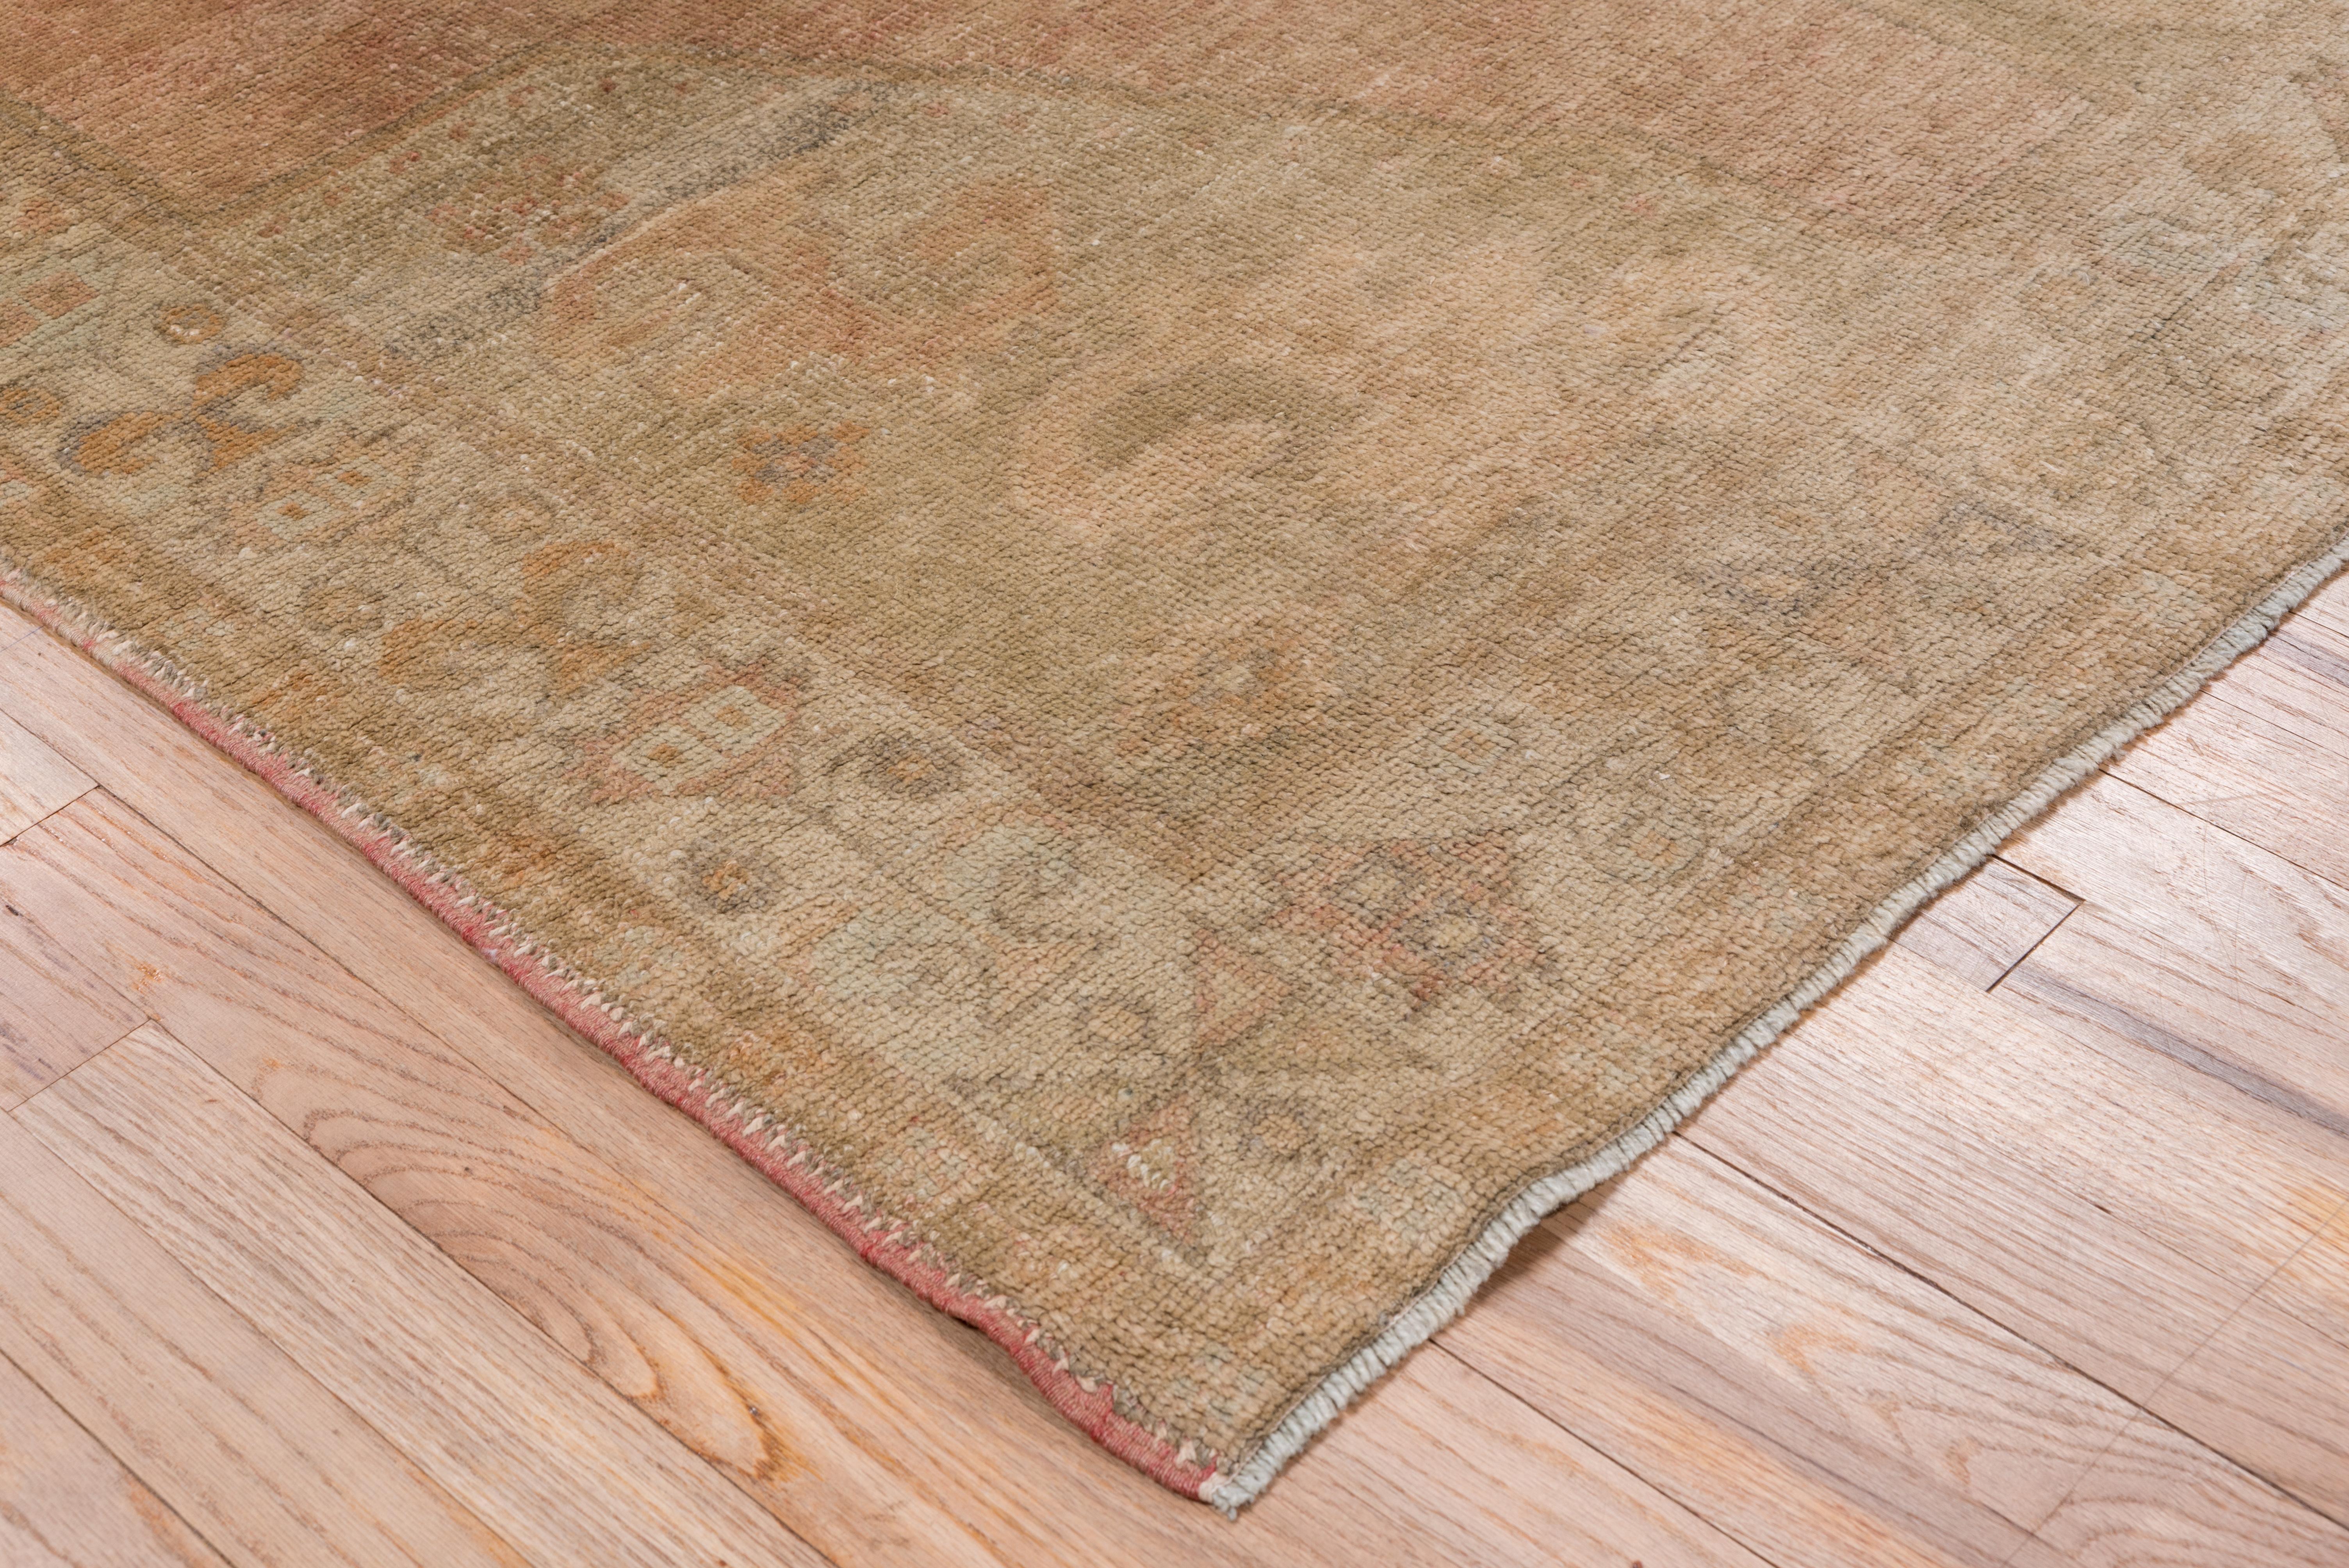 Mid-20th Century Oushak Rug, Muted Colors, Silky Pile